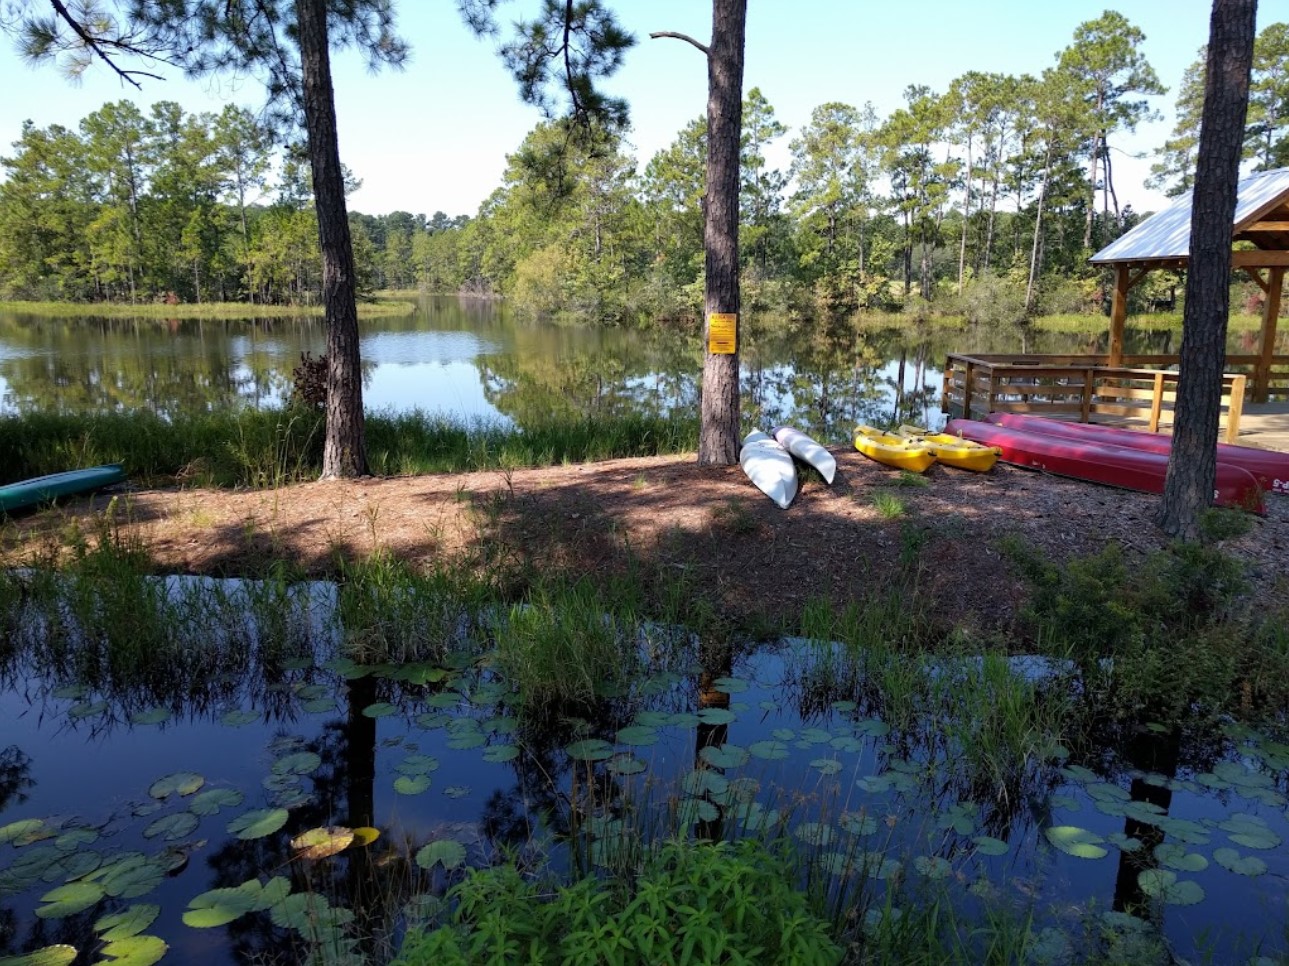 Water activities - camping in the lowcountry